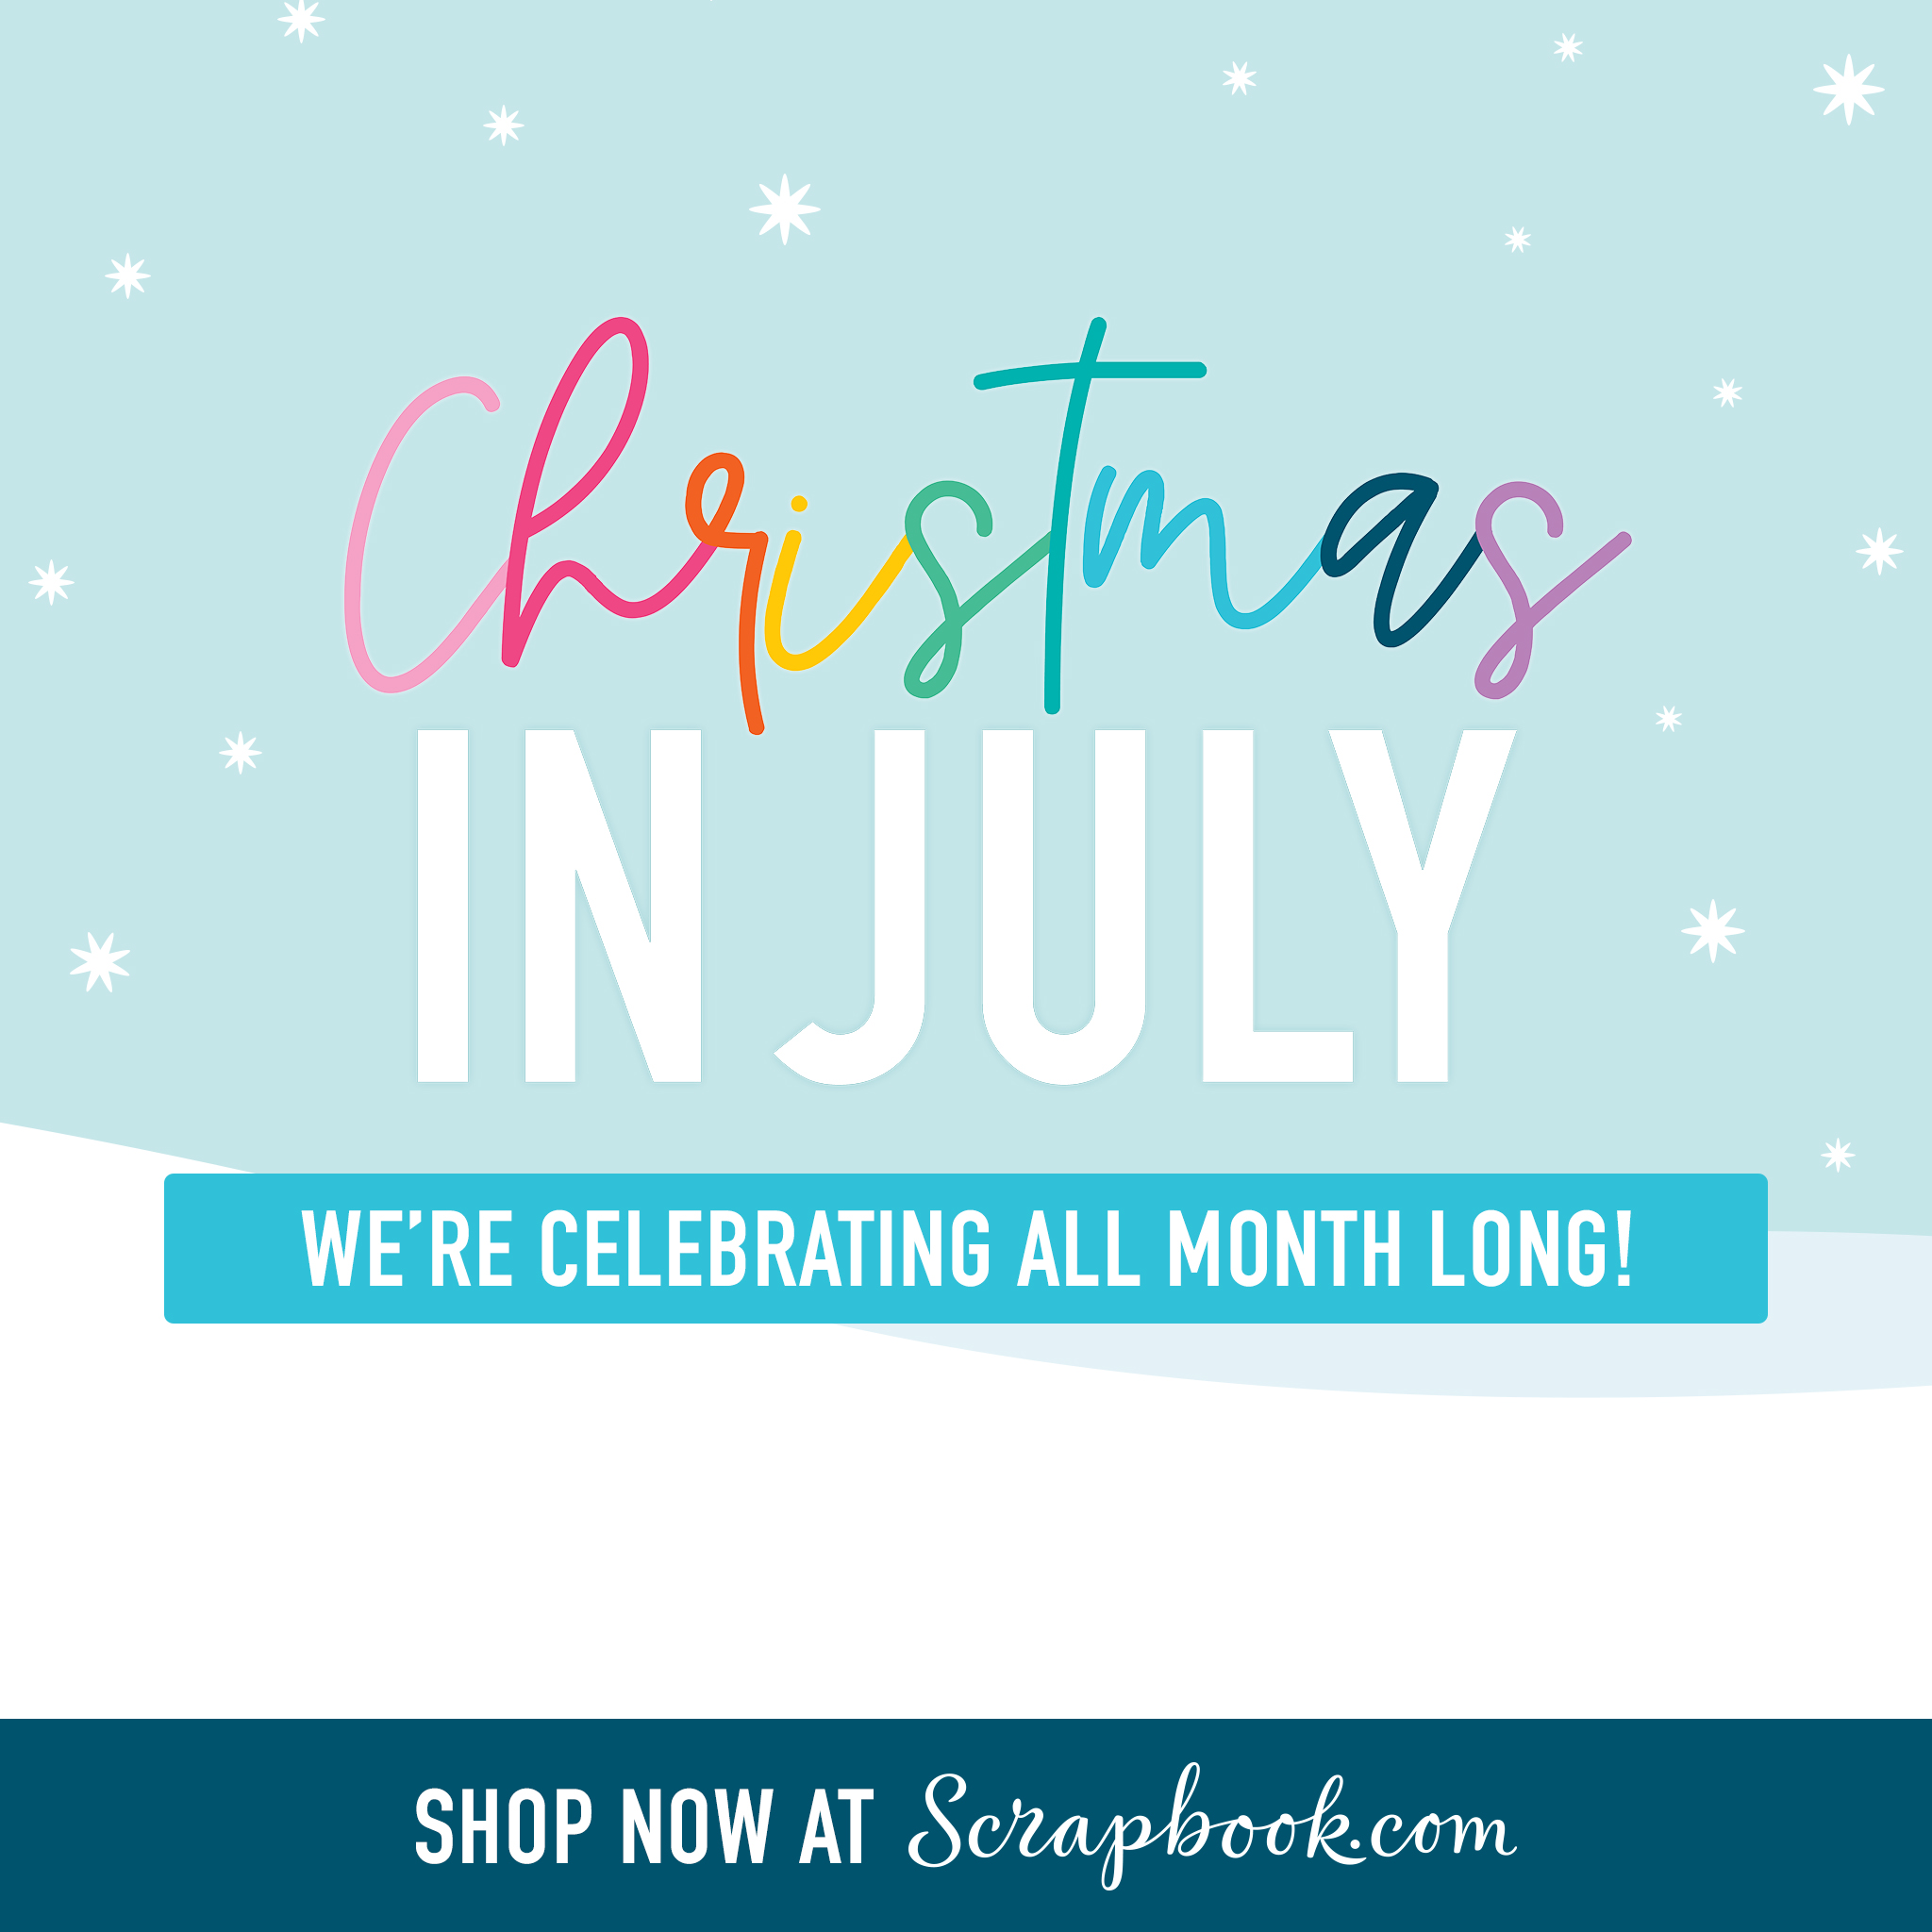 Christmas in July at Scrapbook.com